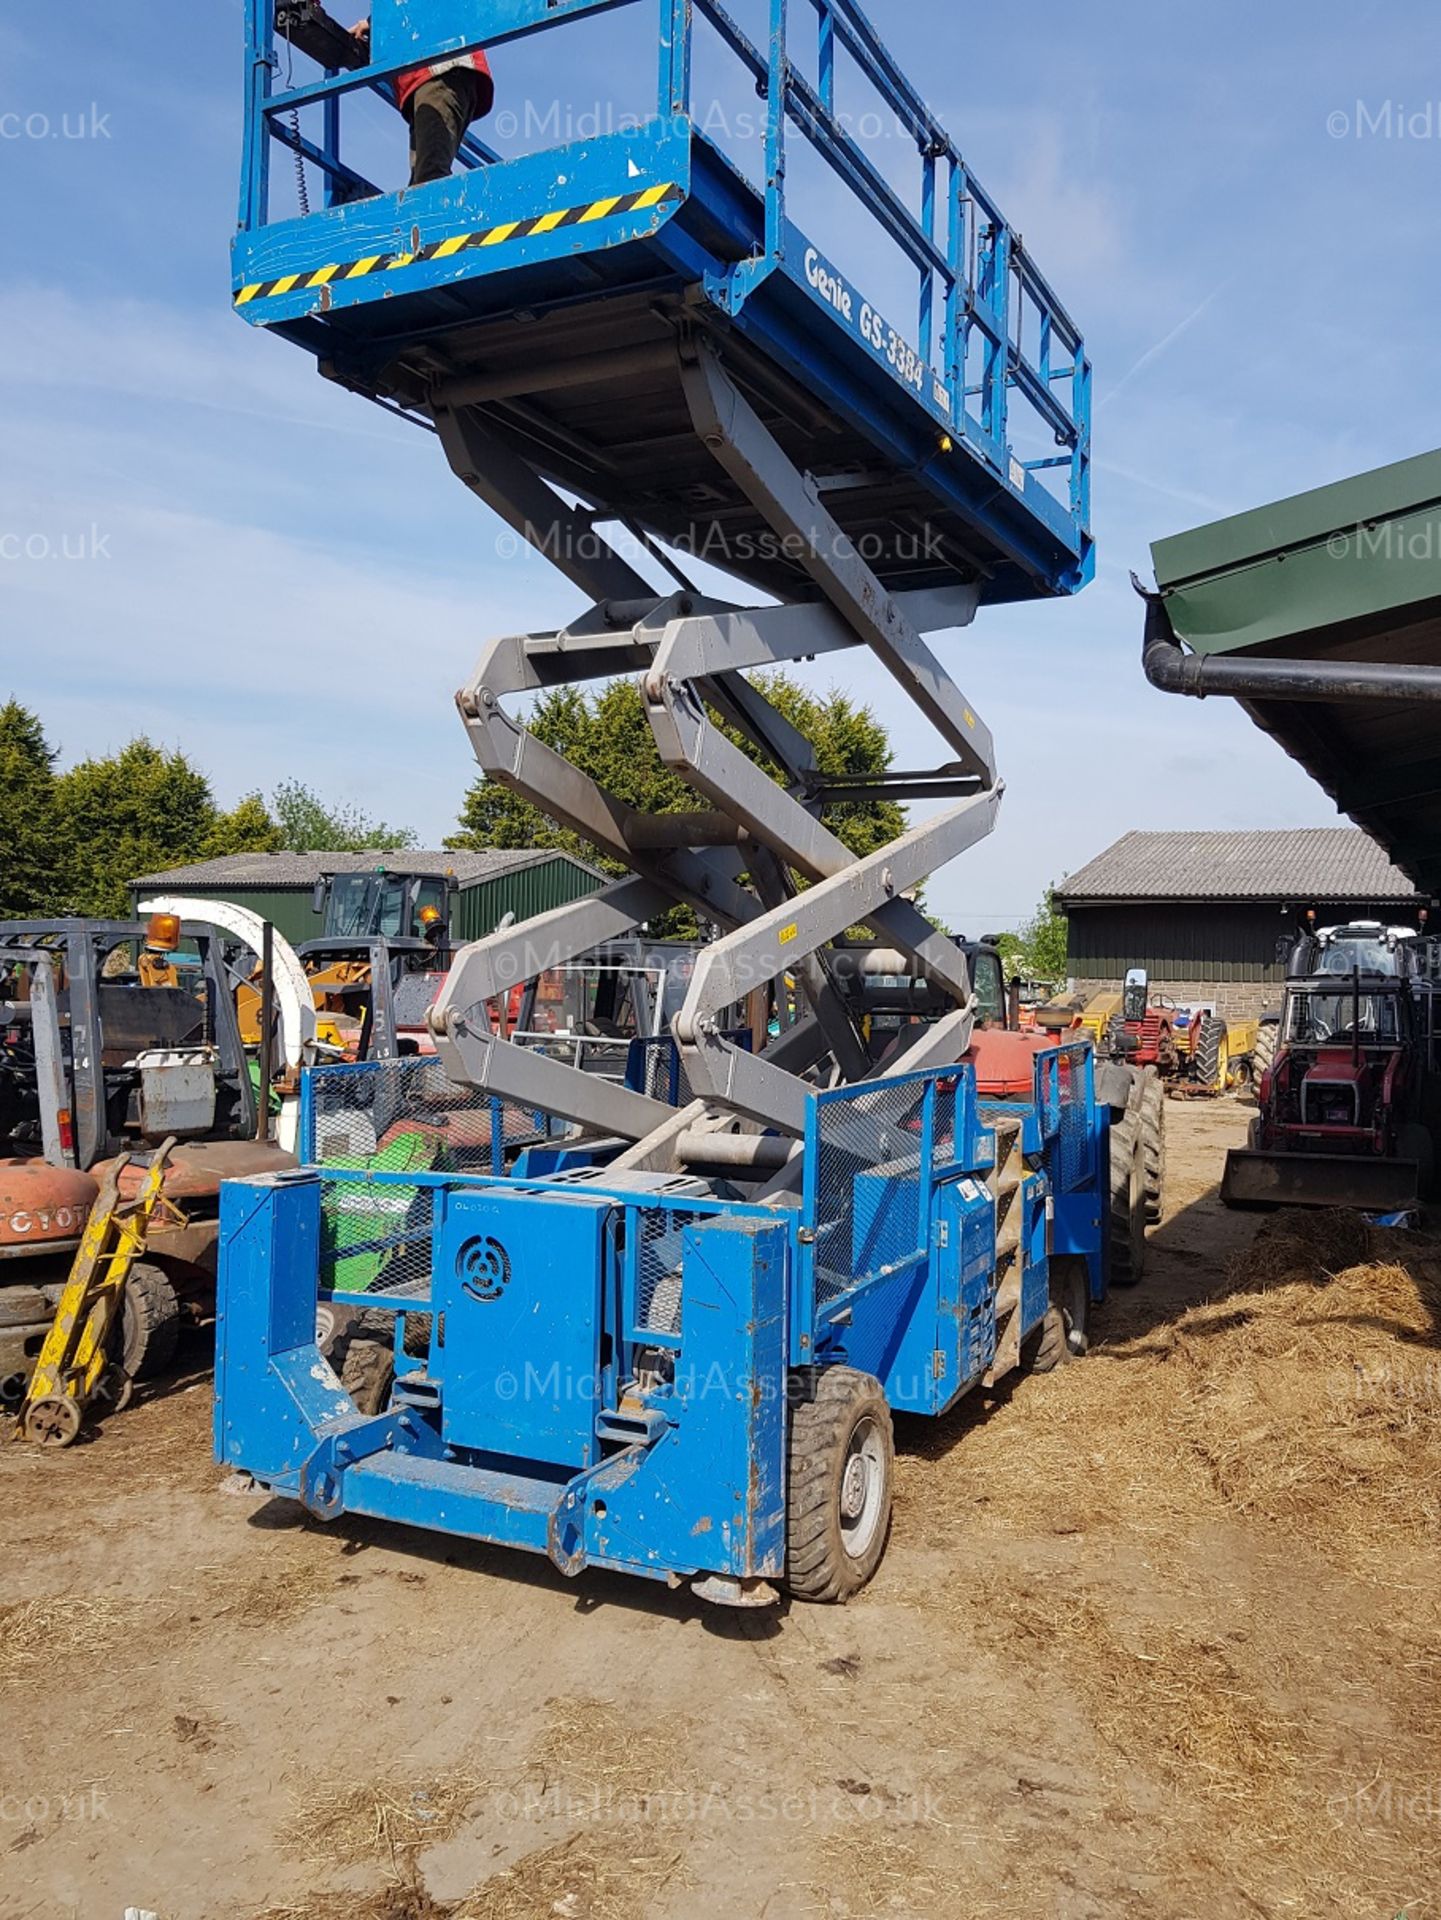 2004 GENIE GS-3384 ROUGH TERRAIN SCISSOR LIFT AUTO LEVELLING 4WD. STARTS, DRIVES AND LIFTS - Image 9 of 10